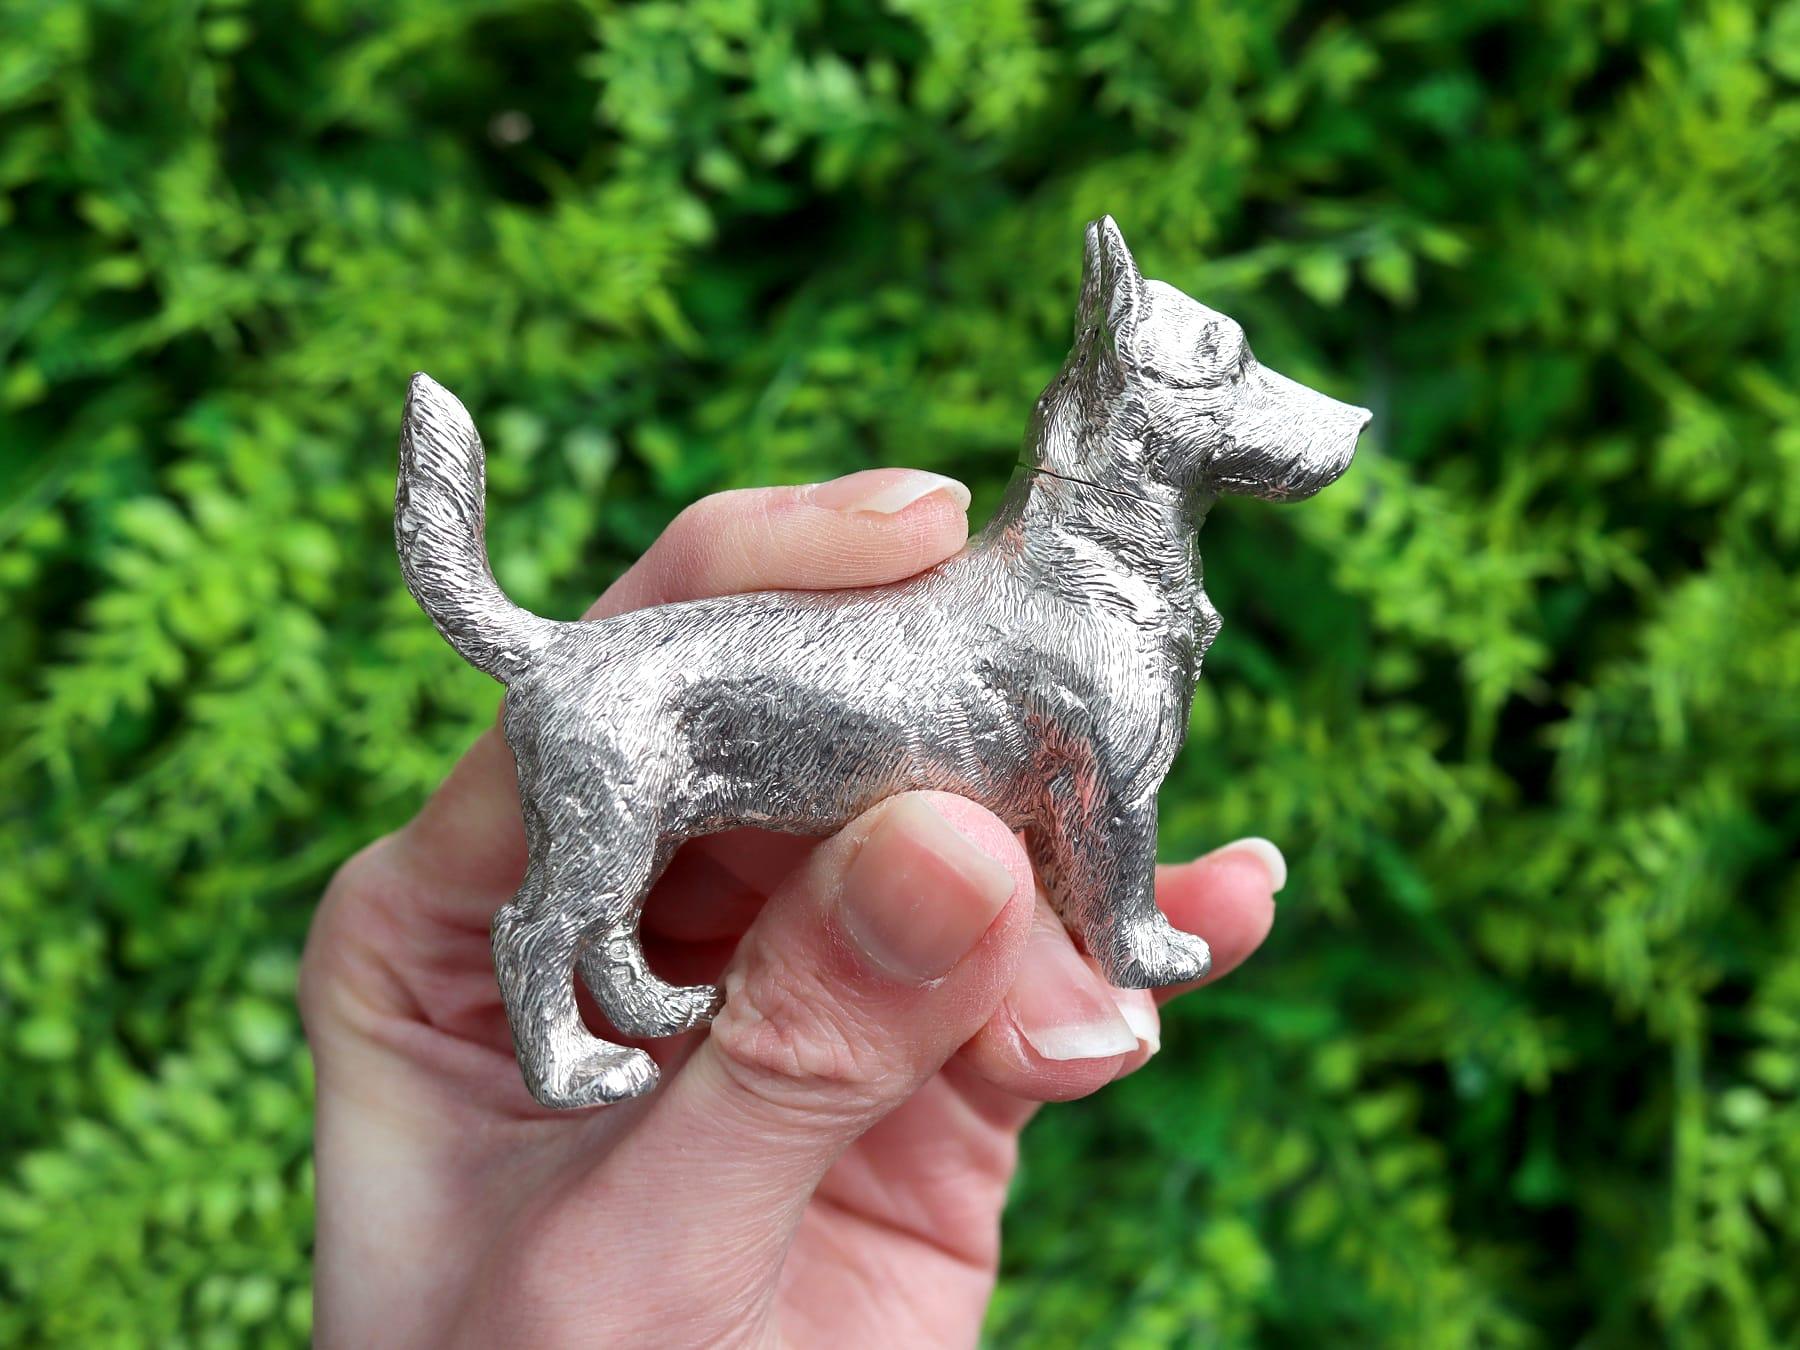 An exceptional, fine and impressive antique George V English sterling silver pepper modelled in the form of a dog; an addition to our novelty silverware collection

This exceptional and rare antique George V cast sterling silver pepperette has